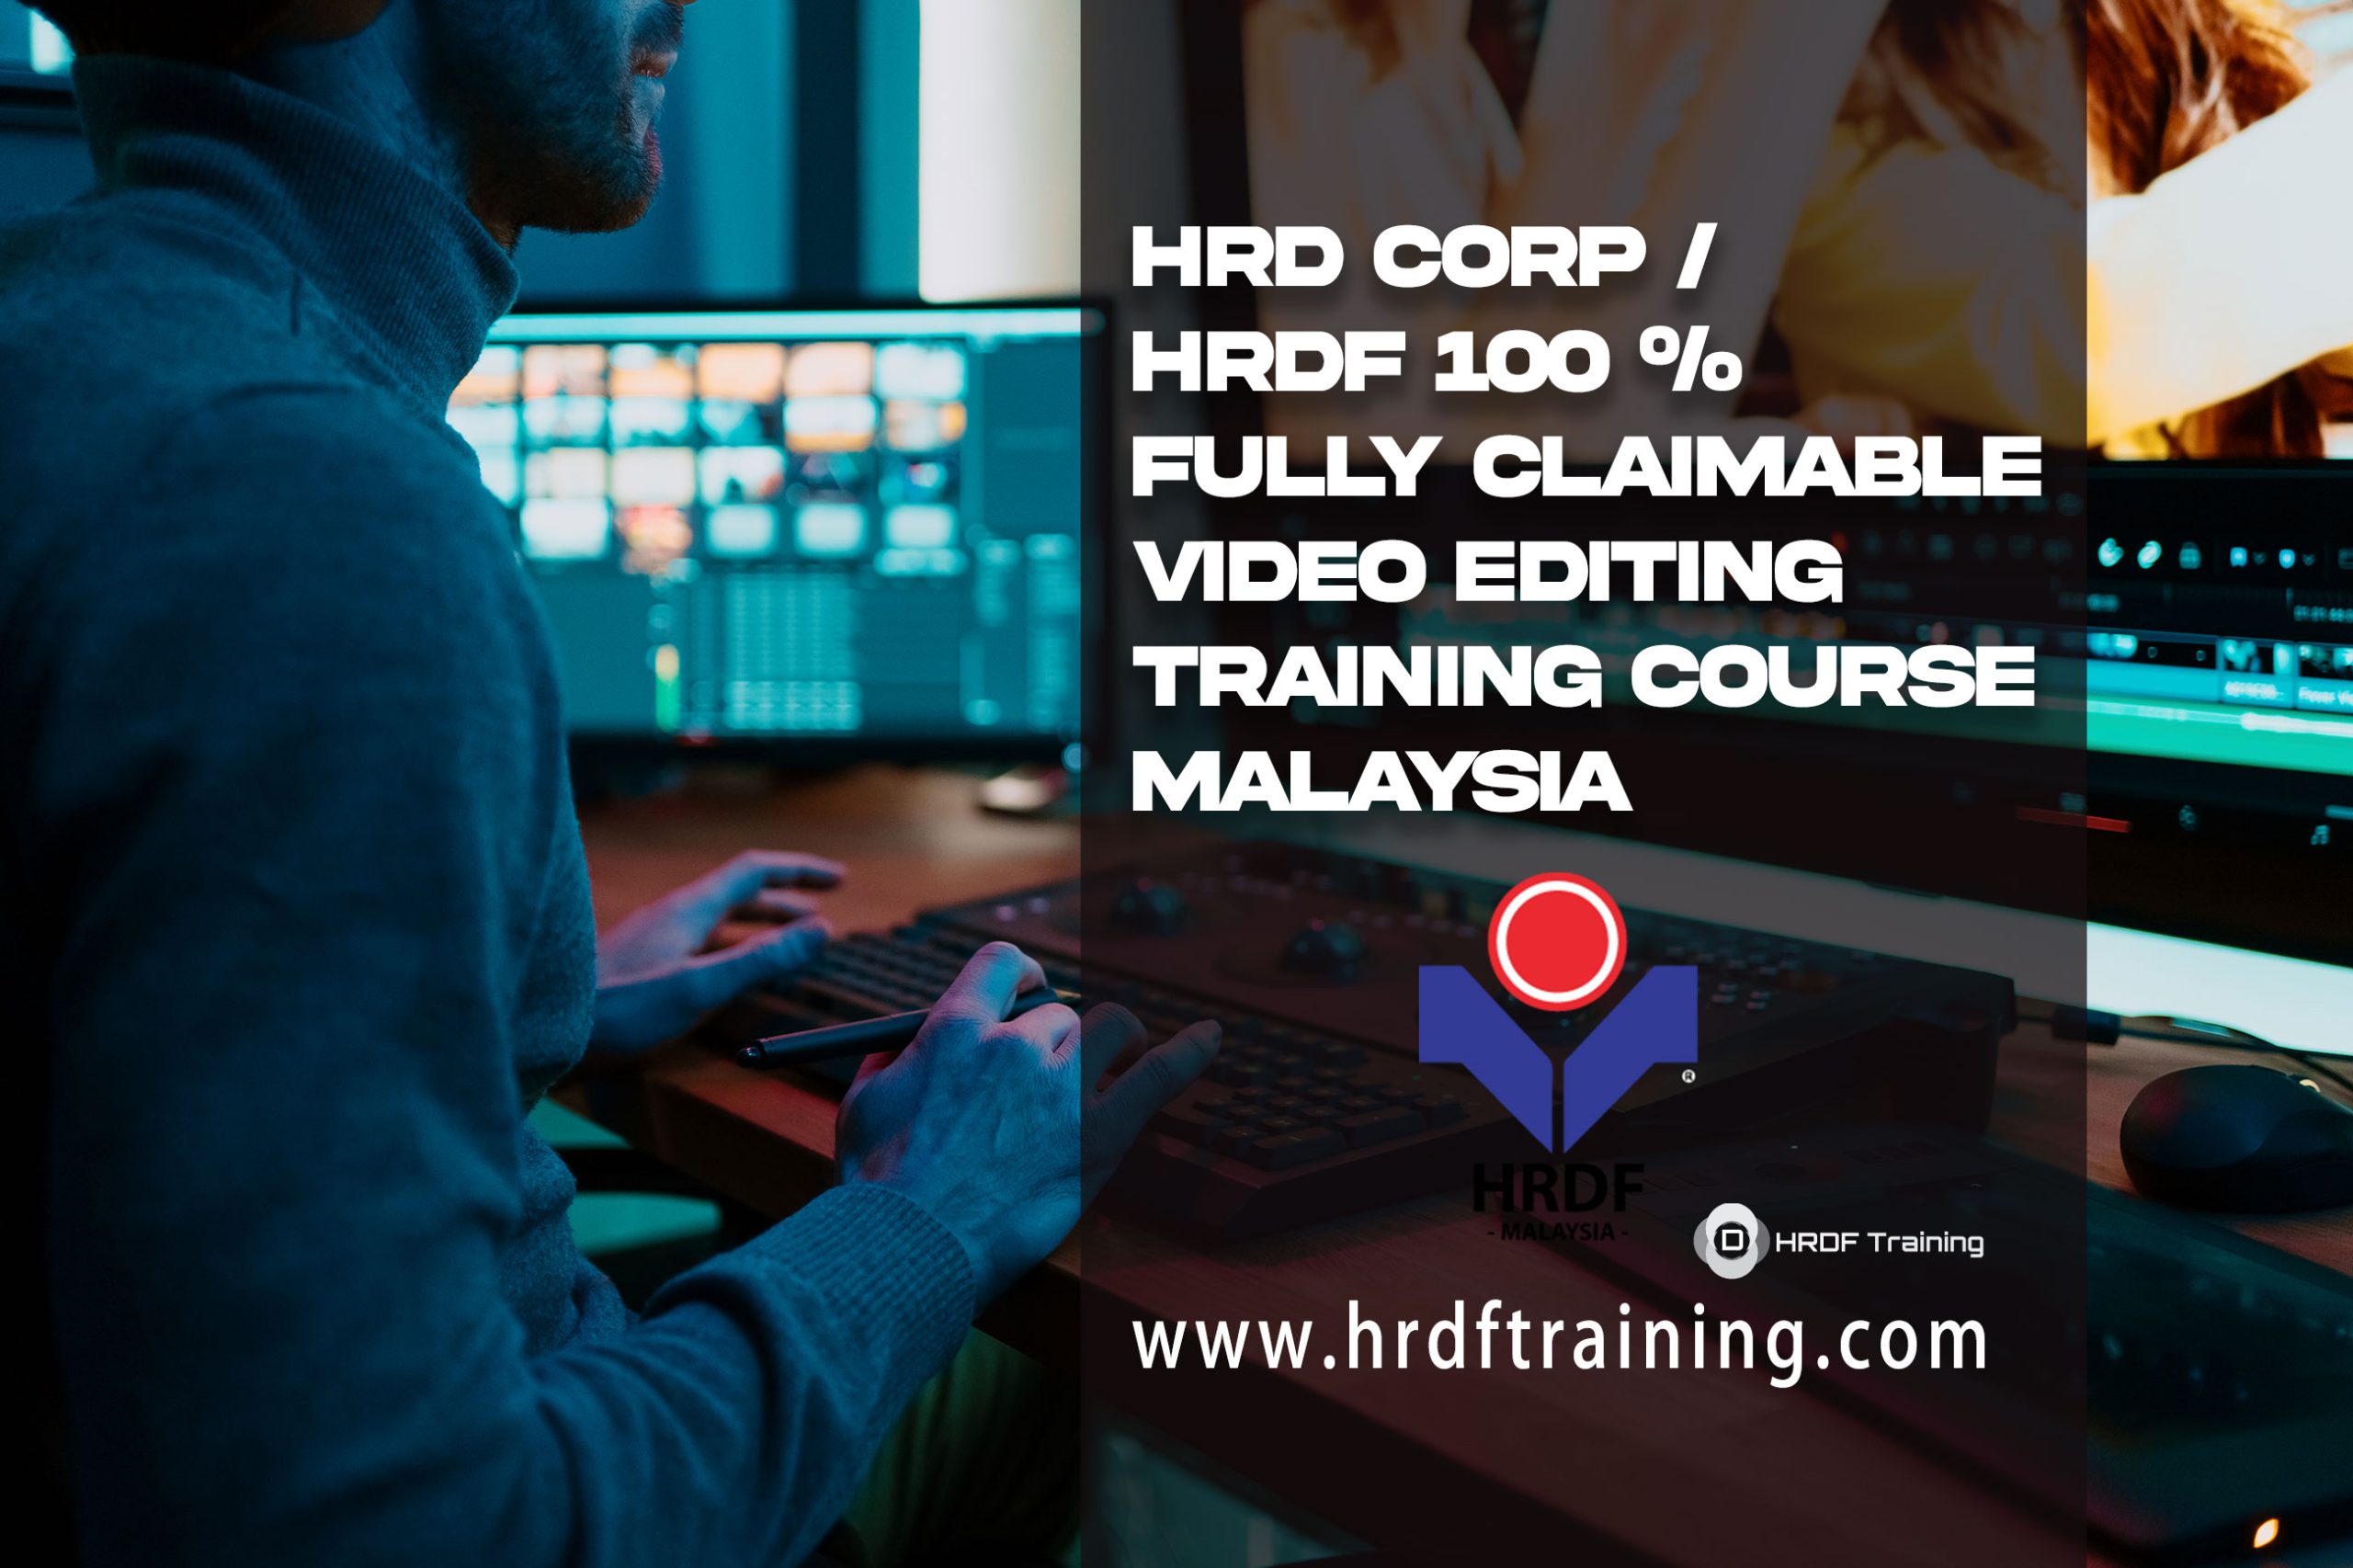 HRDF HRD Corp Claimable Video Editing Training Course Malaysia - December 2022